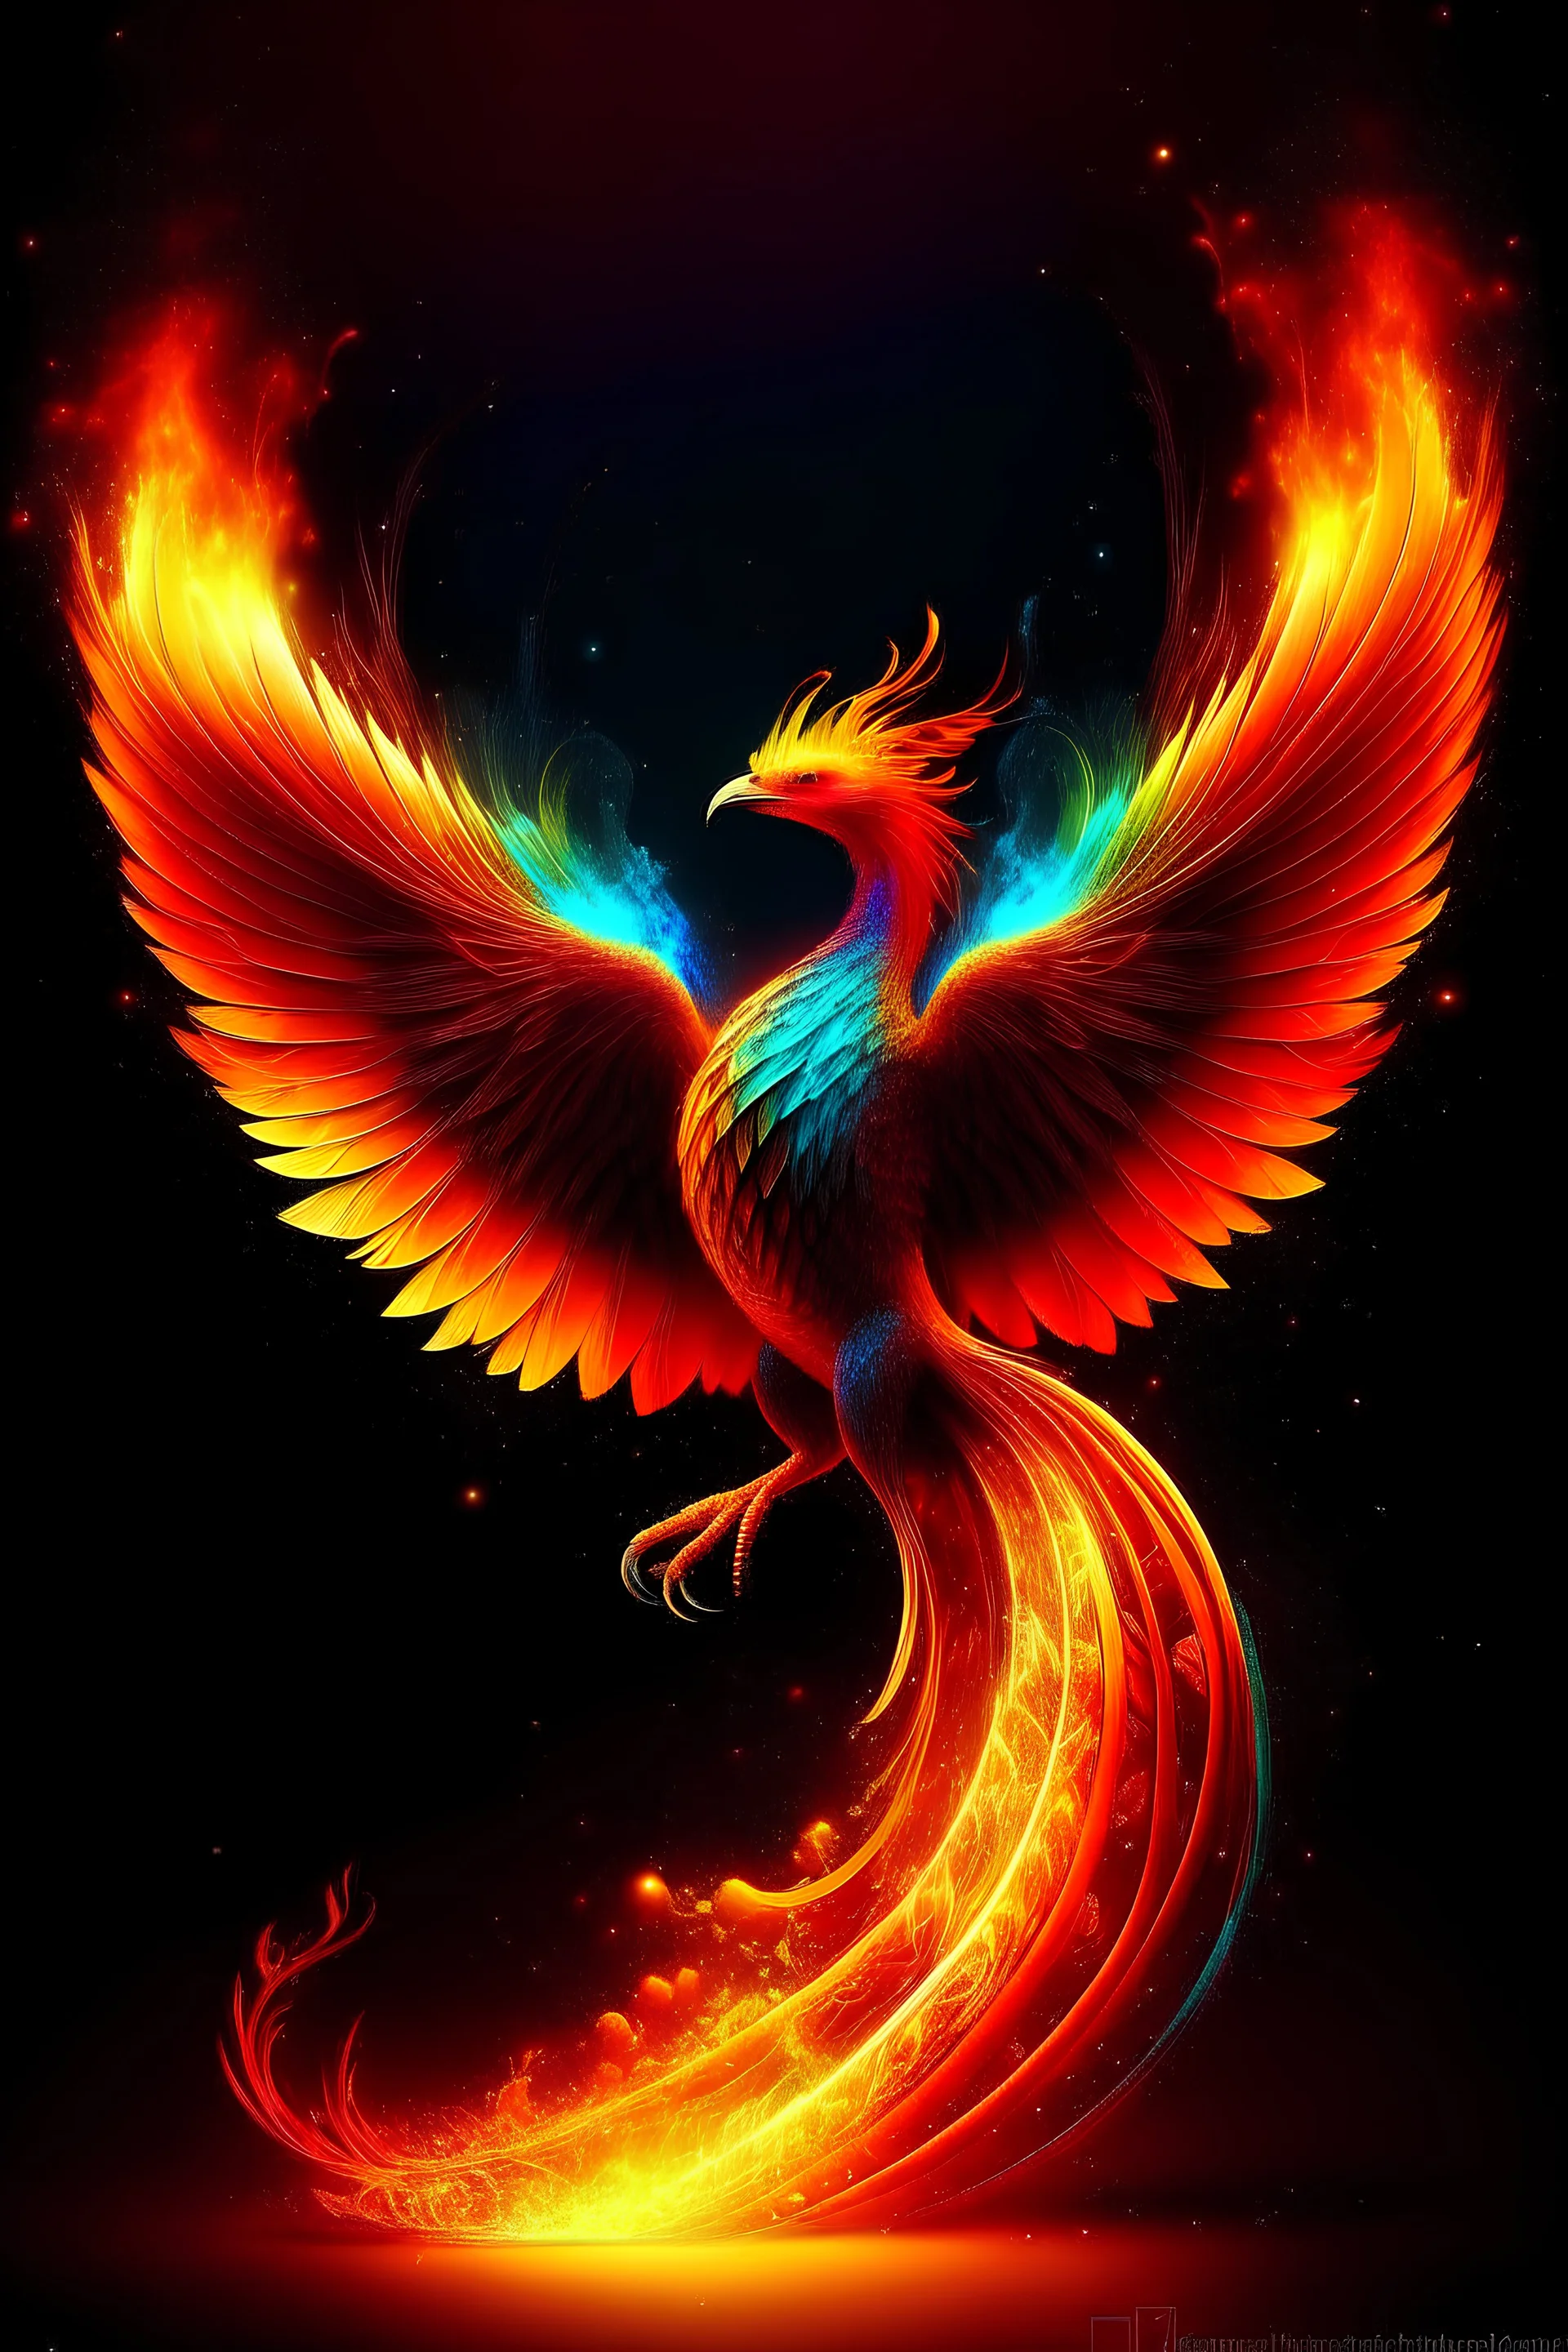 A majestic phoenix reborn from digital ashes in a blaze of holographic flames